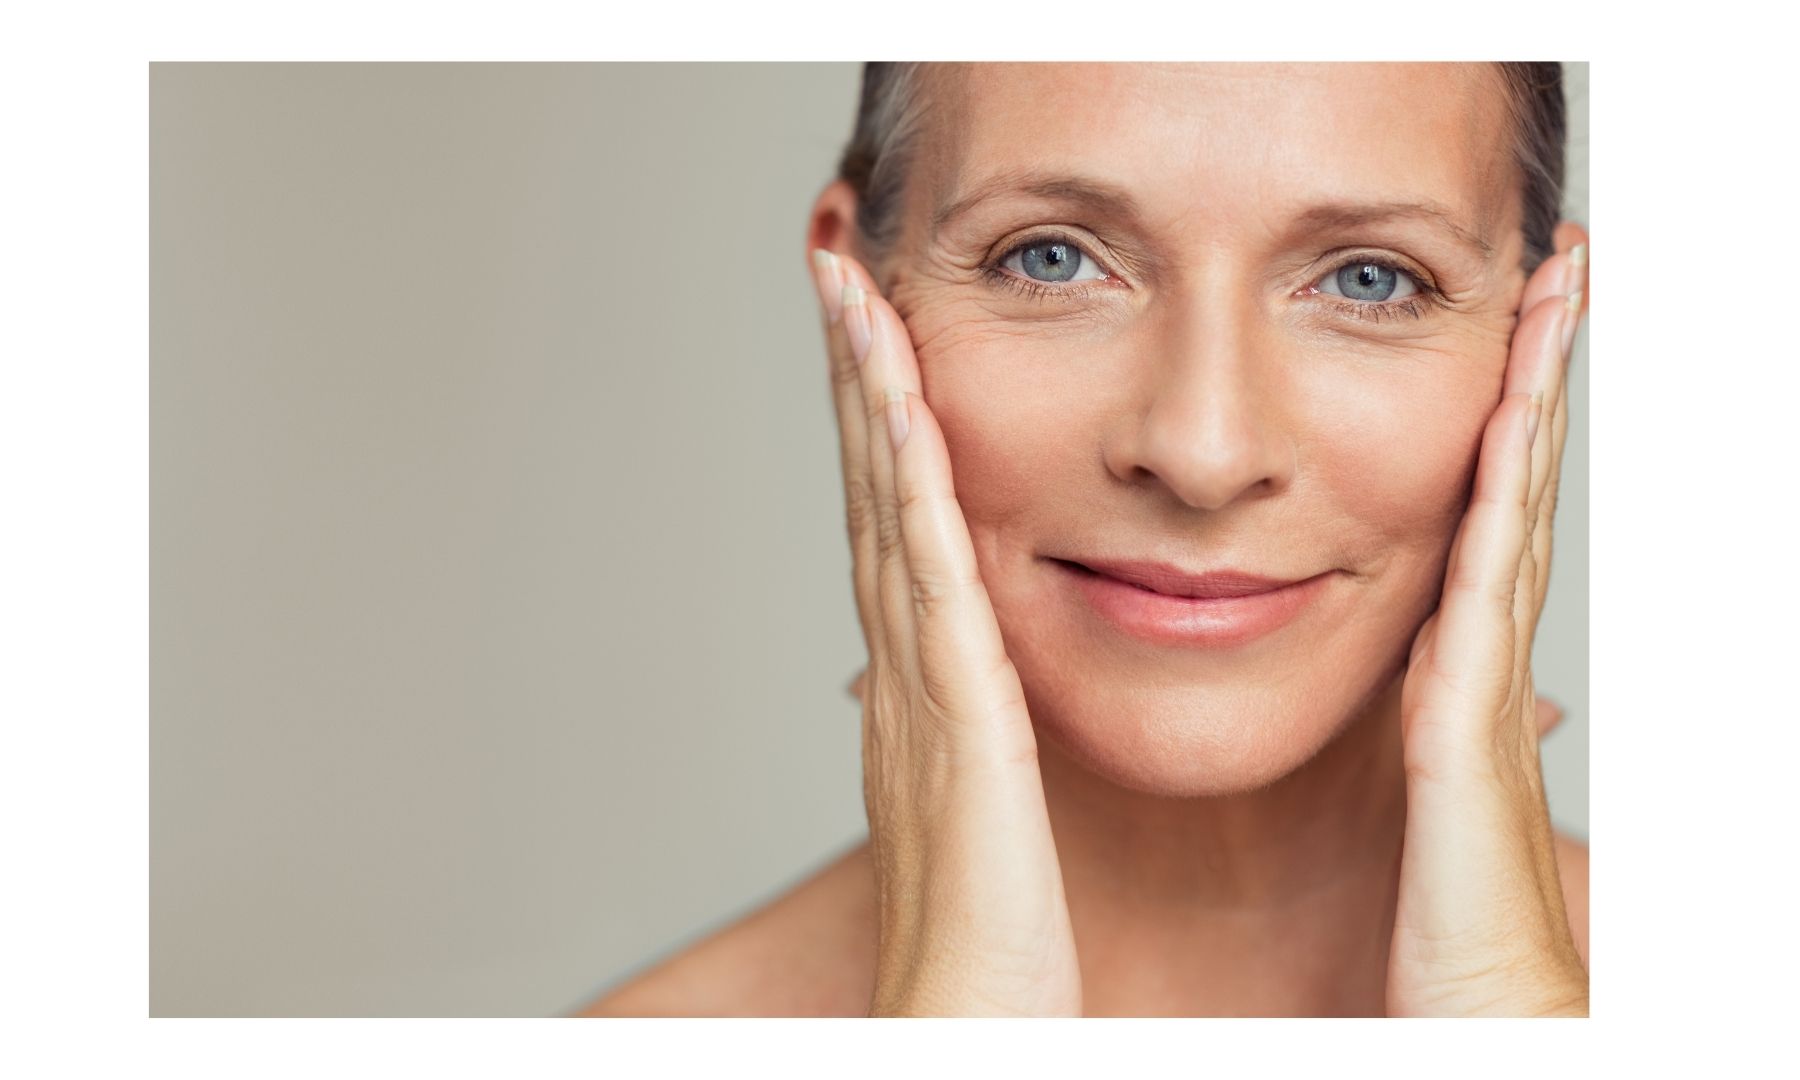 HOW TO PREVENT WRINKLES AND PREMATURE AGEING